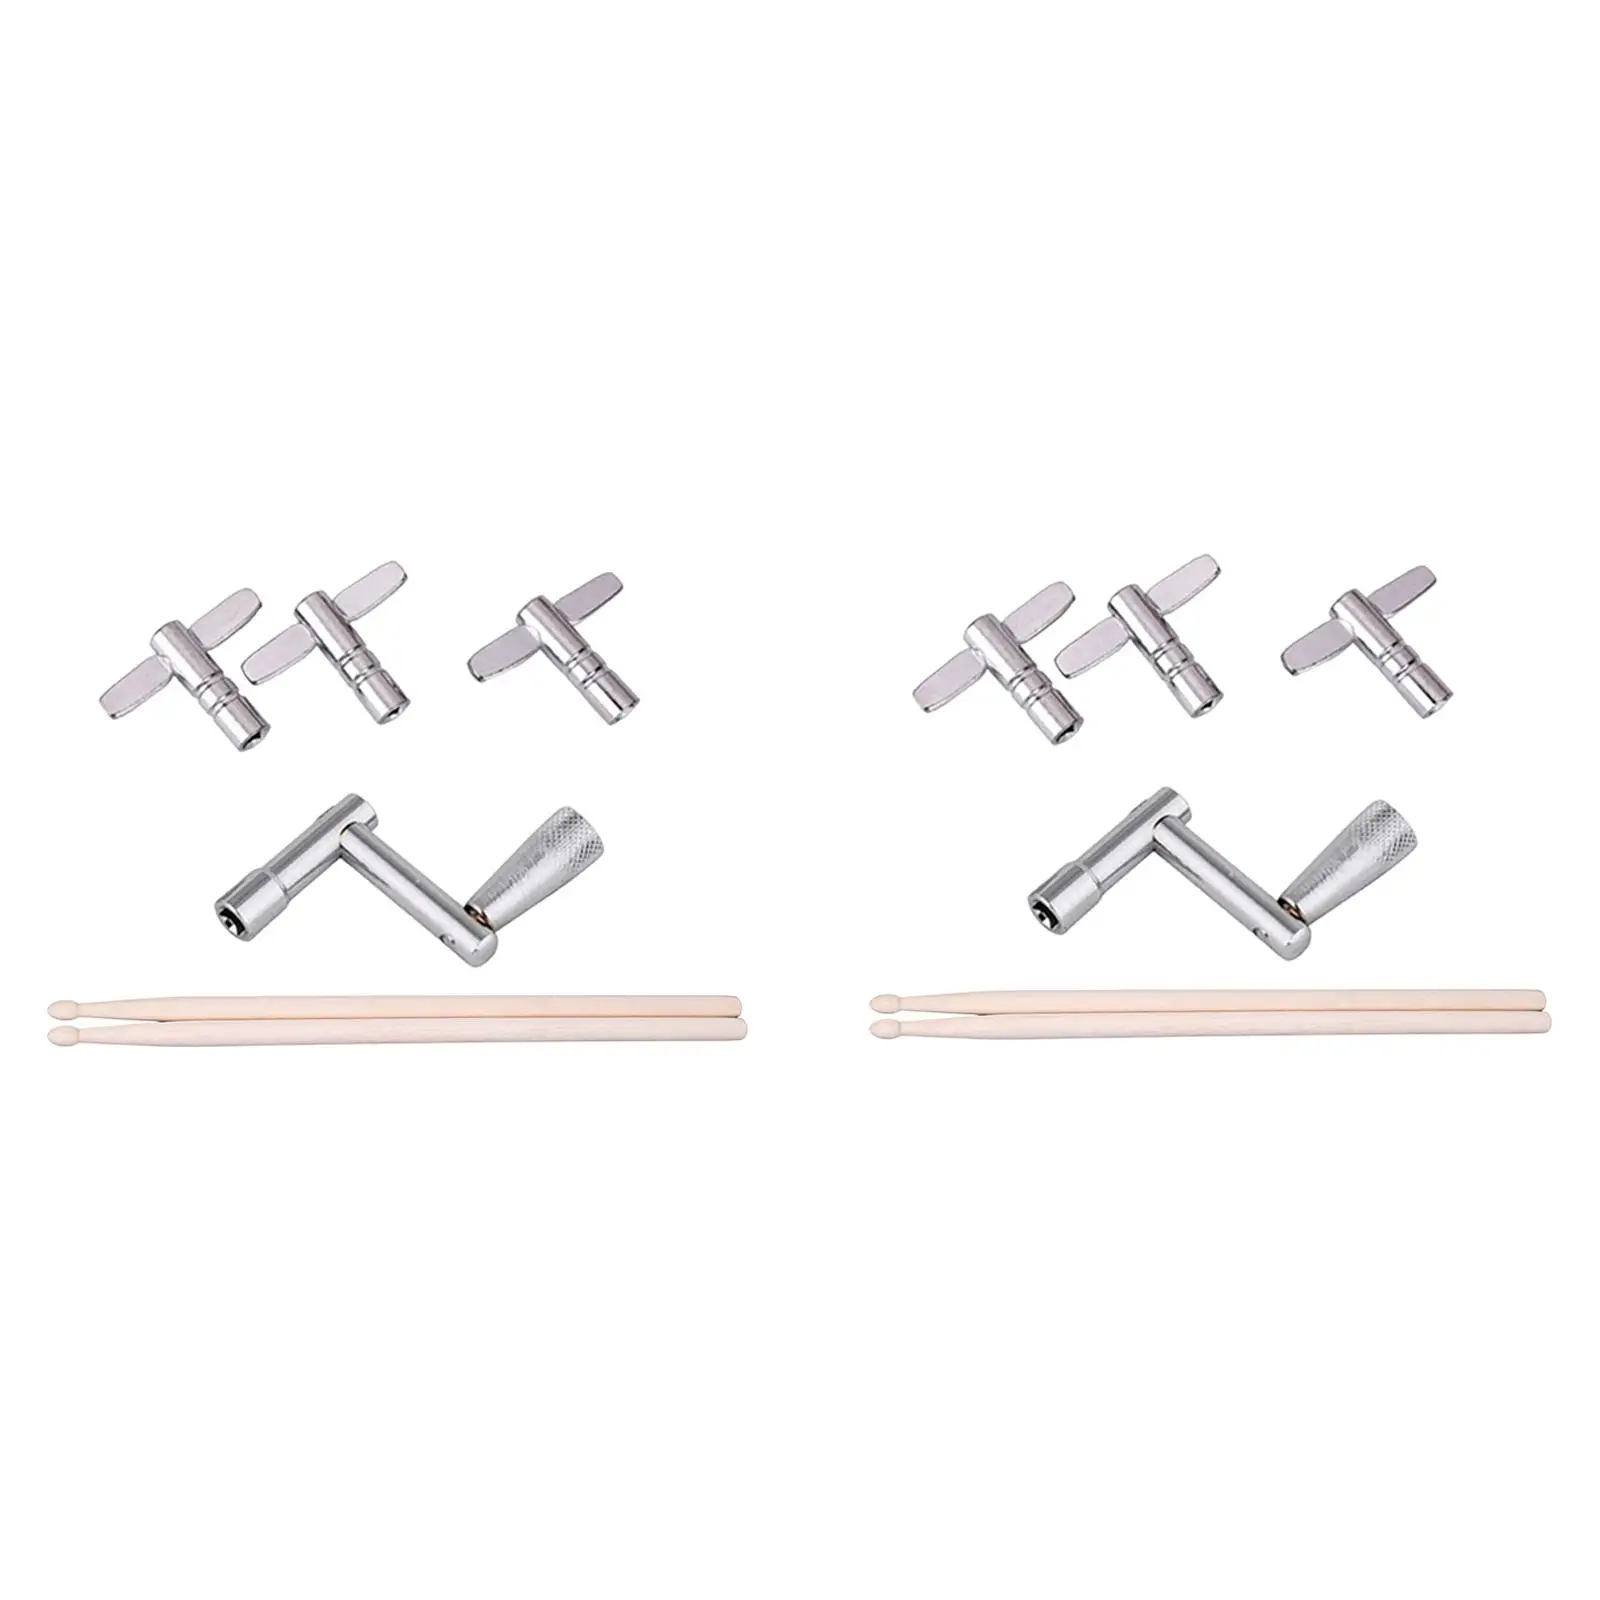 Wood Drumsticks Pair and Drum Tuning Keys Cymbal Mallets for Snare Drum Accessory